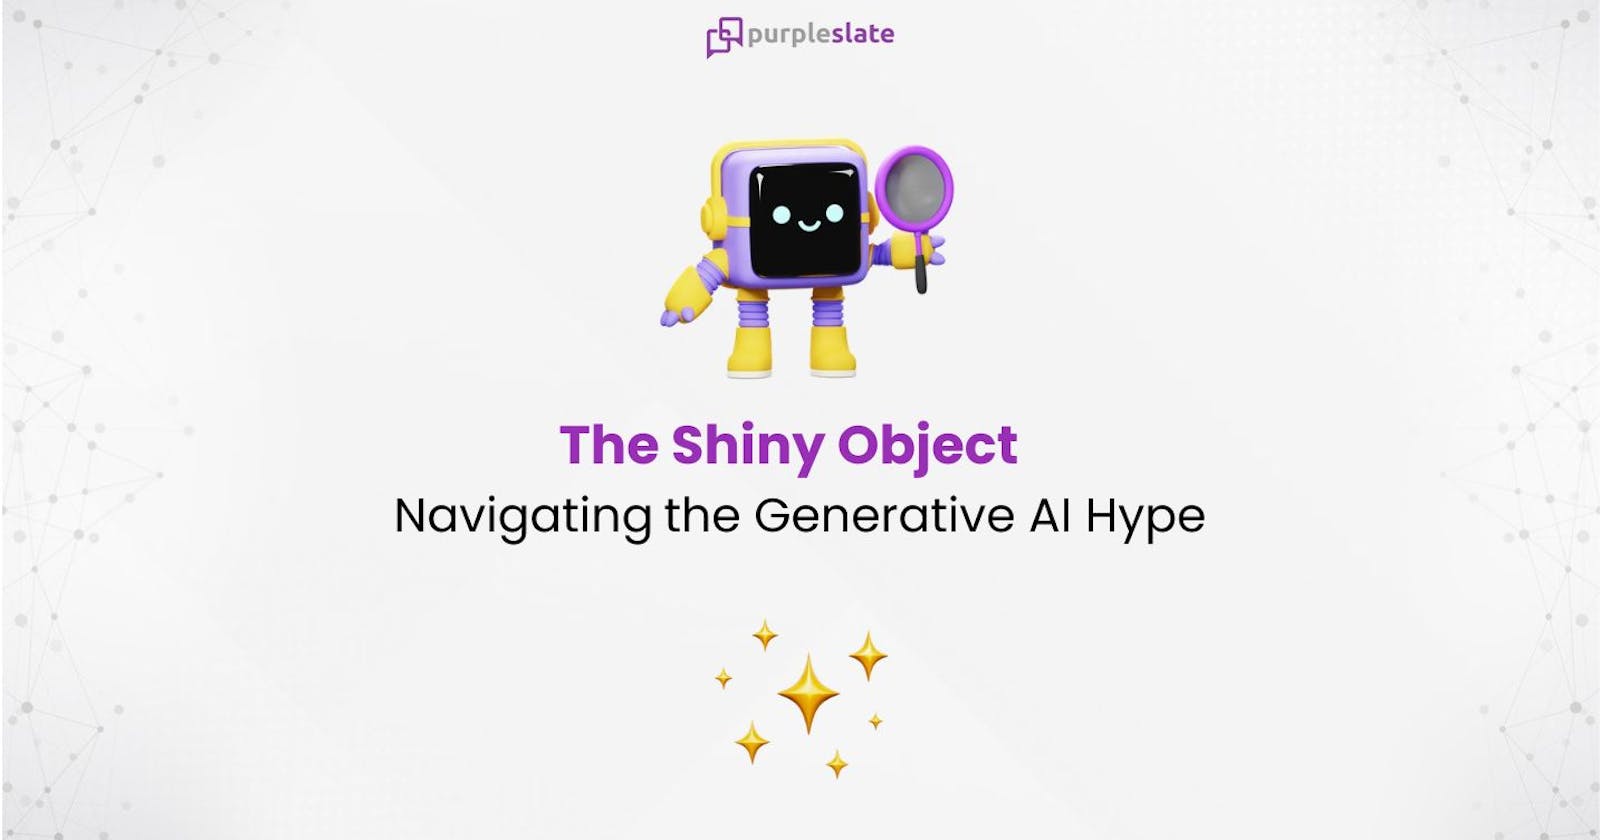 The Shiny Object — Navigating the Generative AI Hype